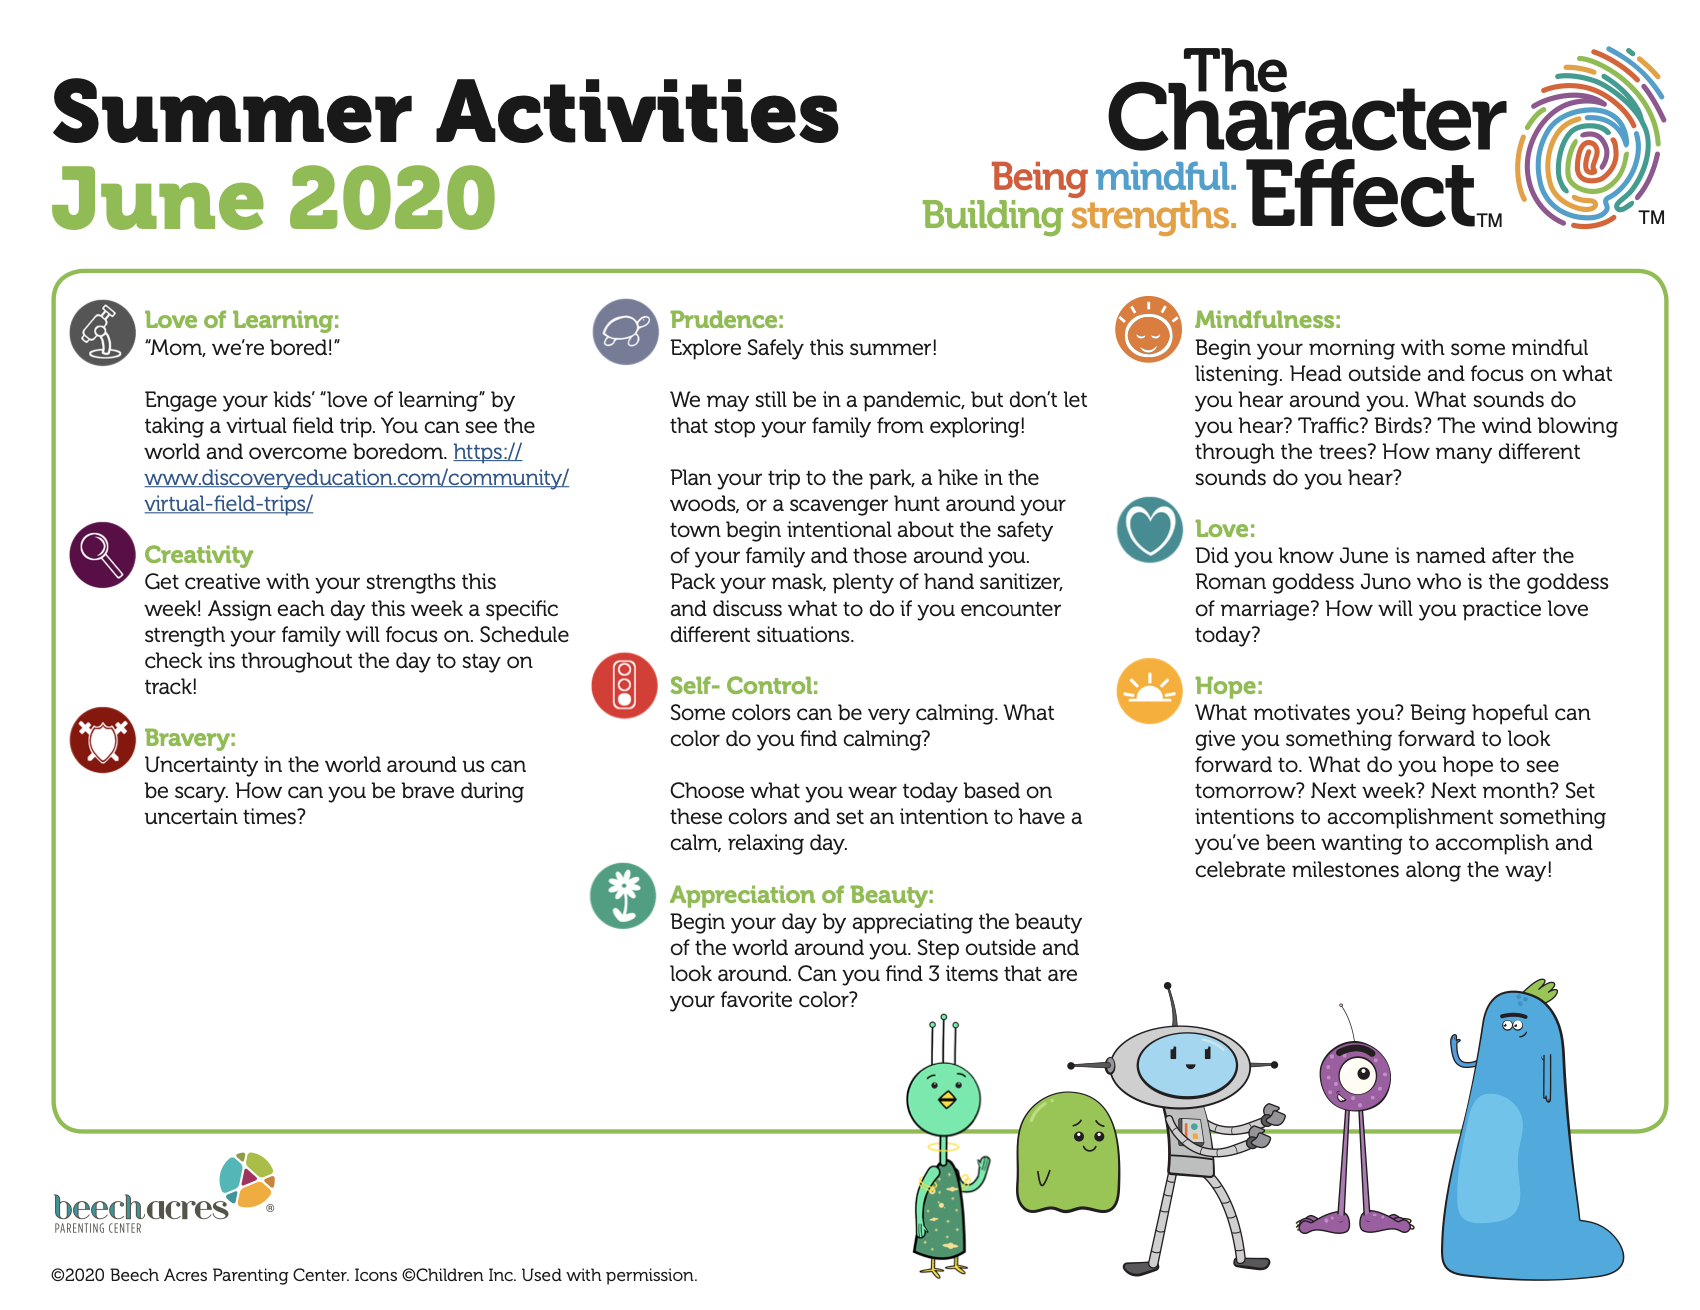 Summer Activities From The Character Effect™